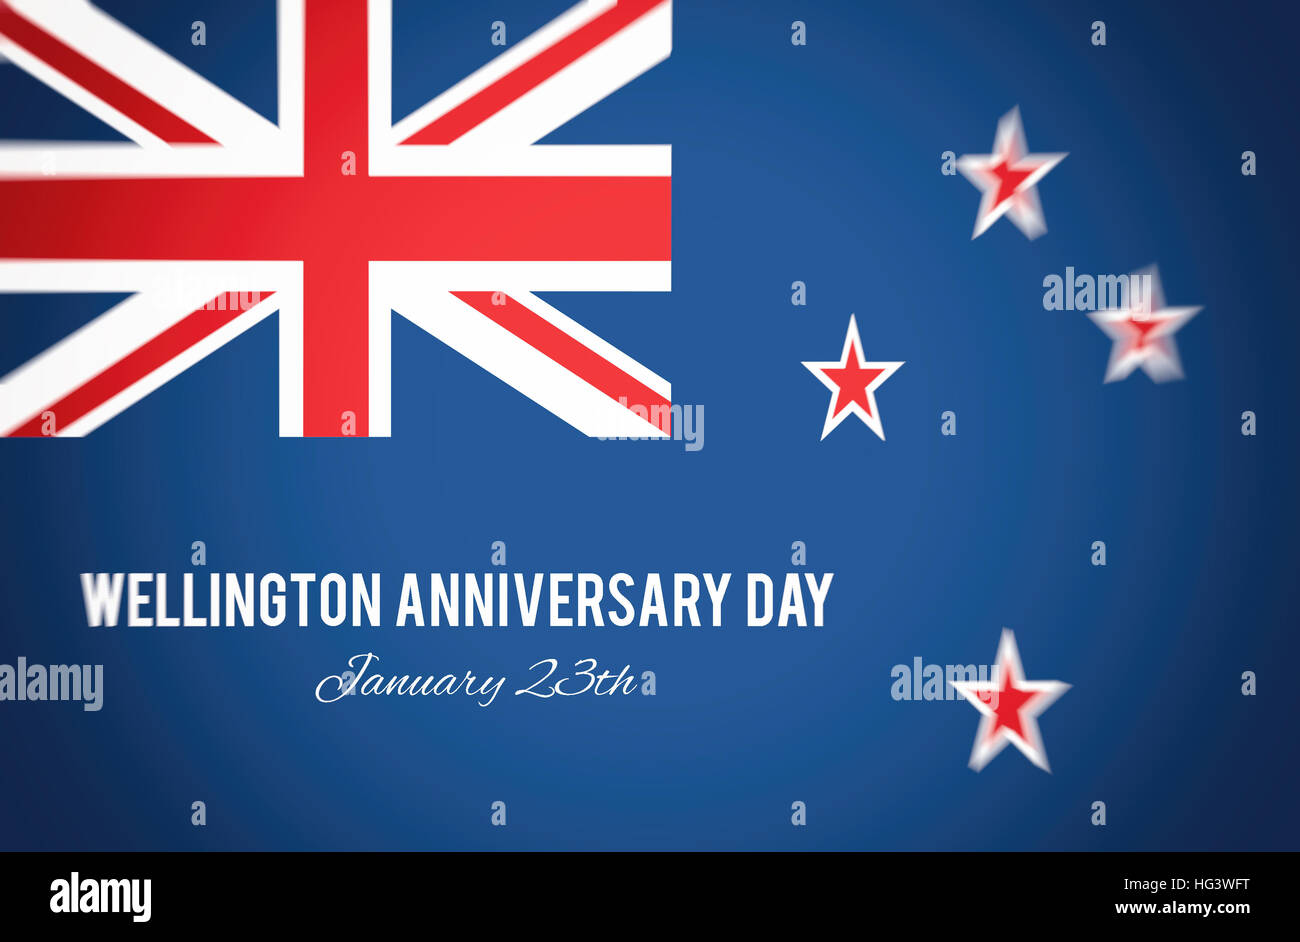 Wellington Anniversary Day. Flag of New Zealand. Motivation, poster, quote, illustration, Stock Photo